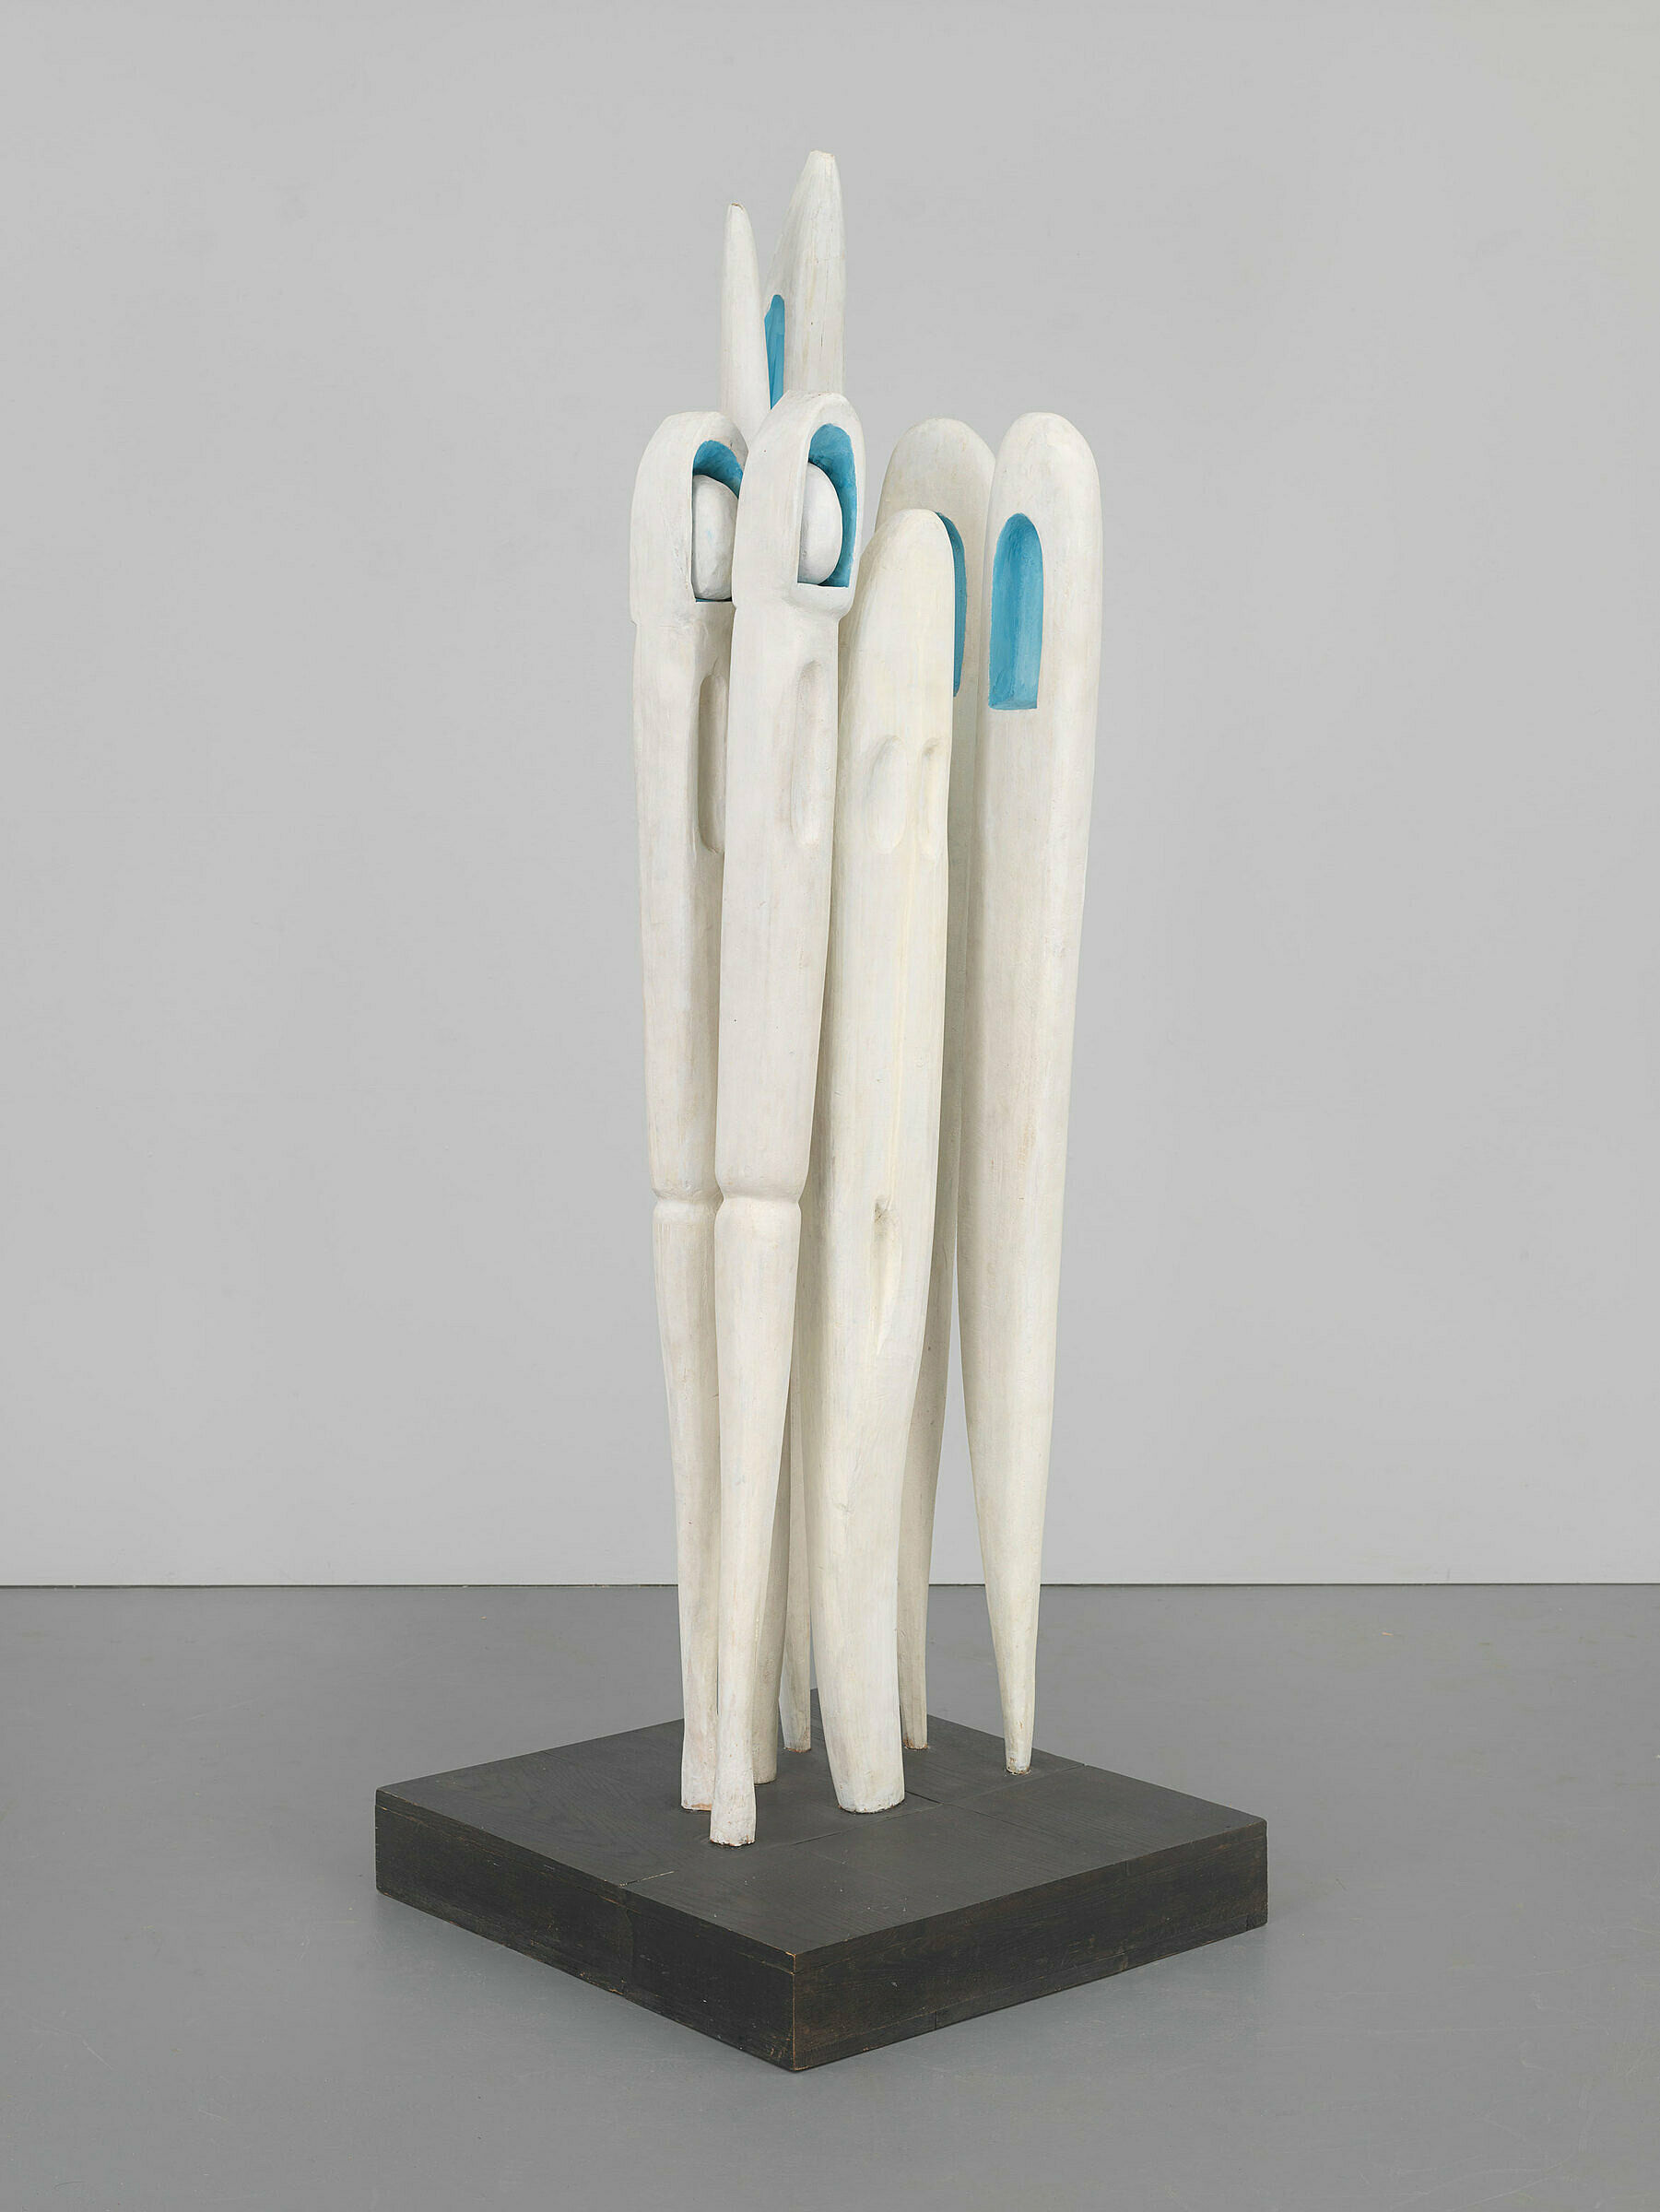 A sculpture of long white poles with blue inserts at the top.